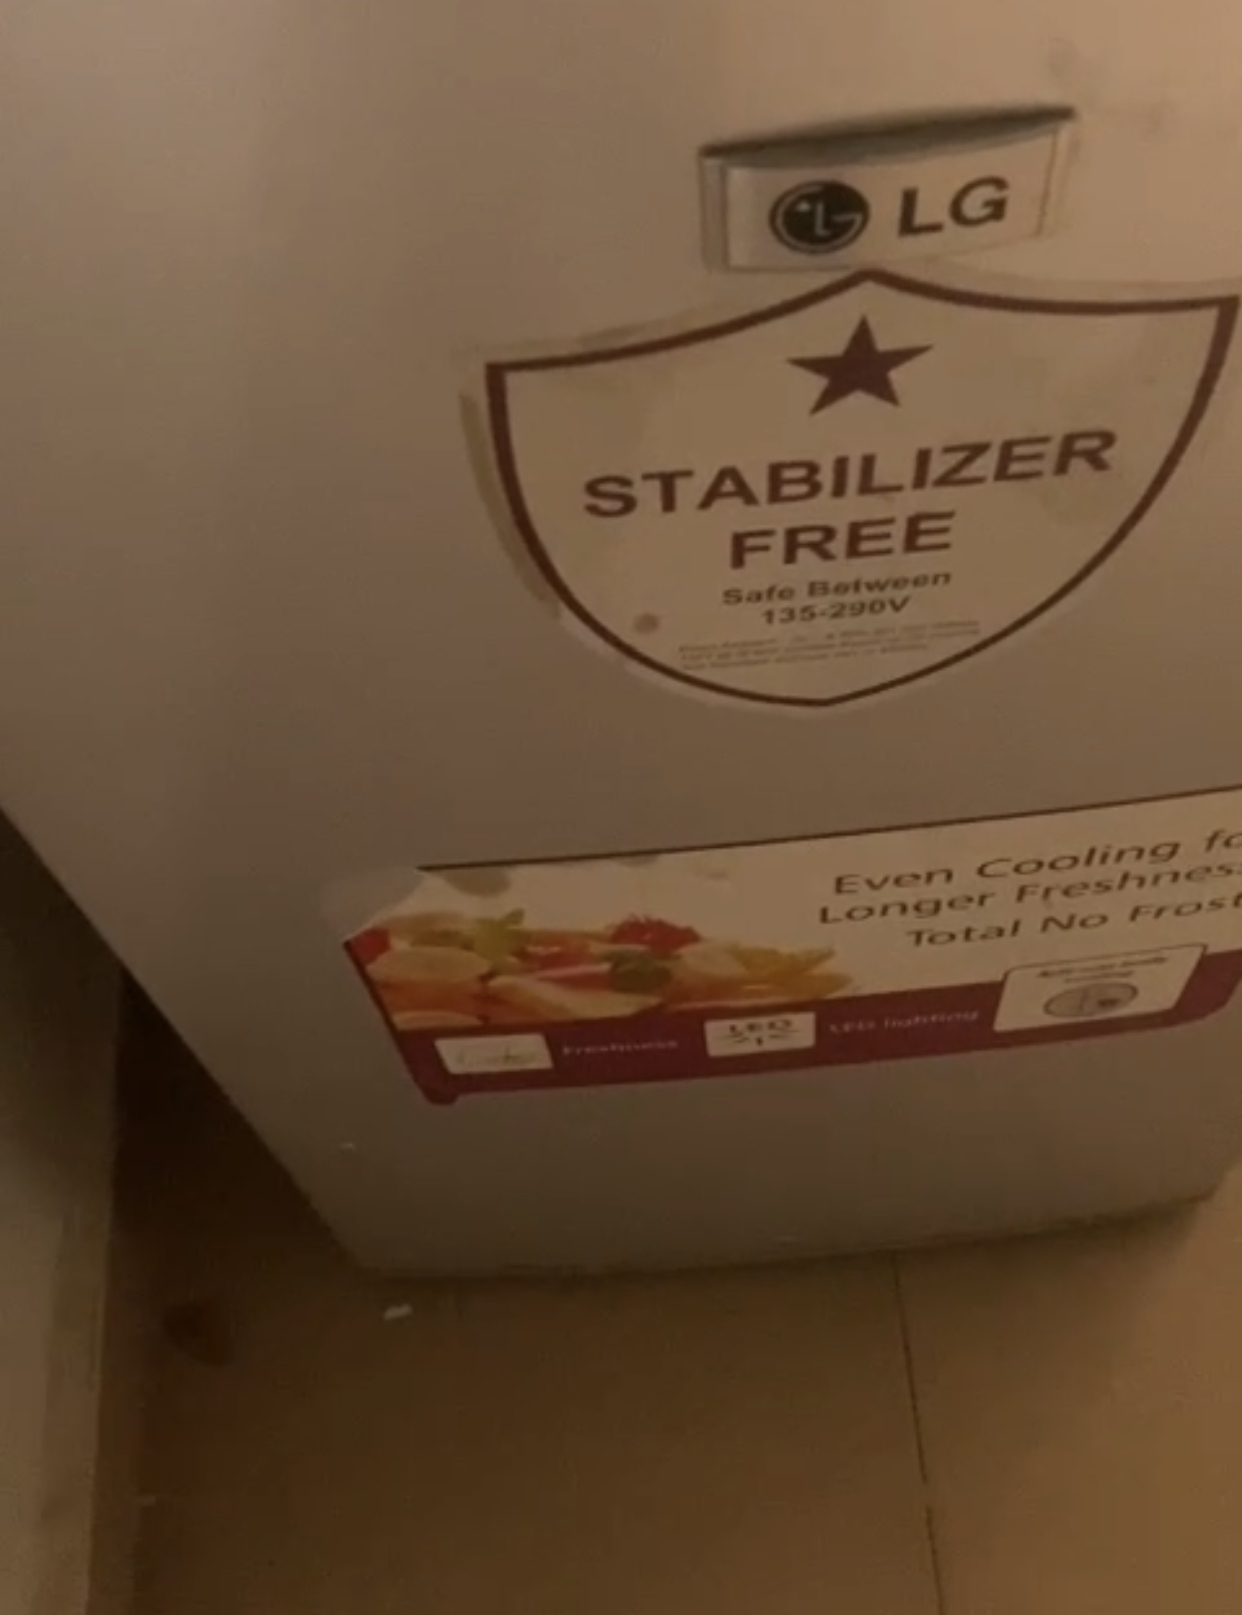 LG Refrigerator for sale (Working Perfectly)